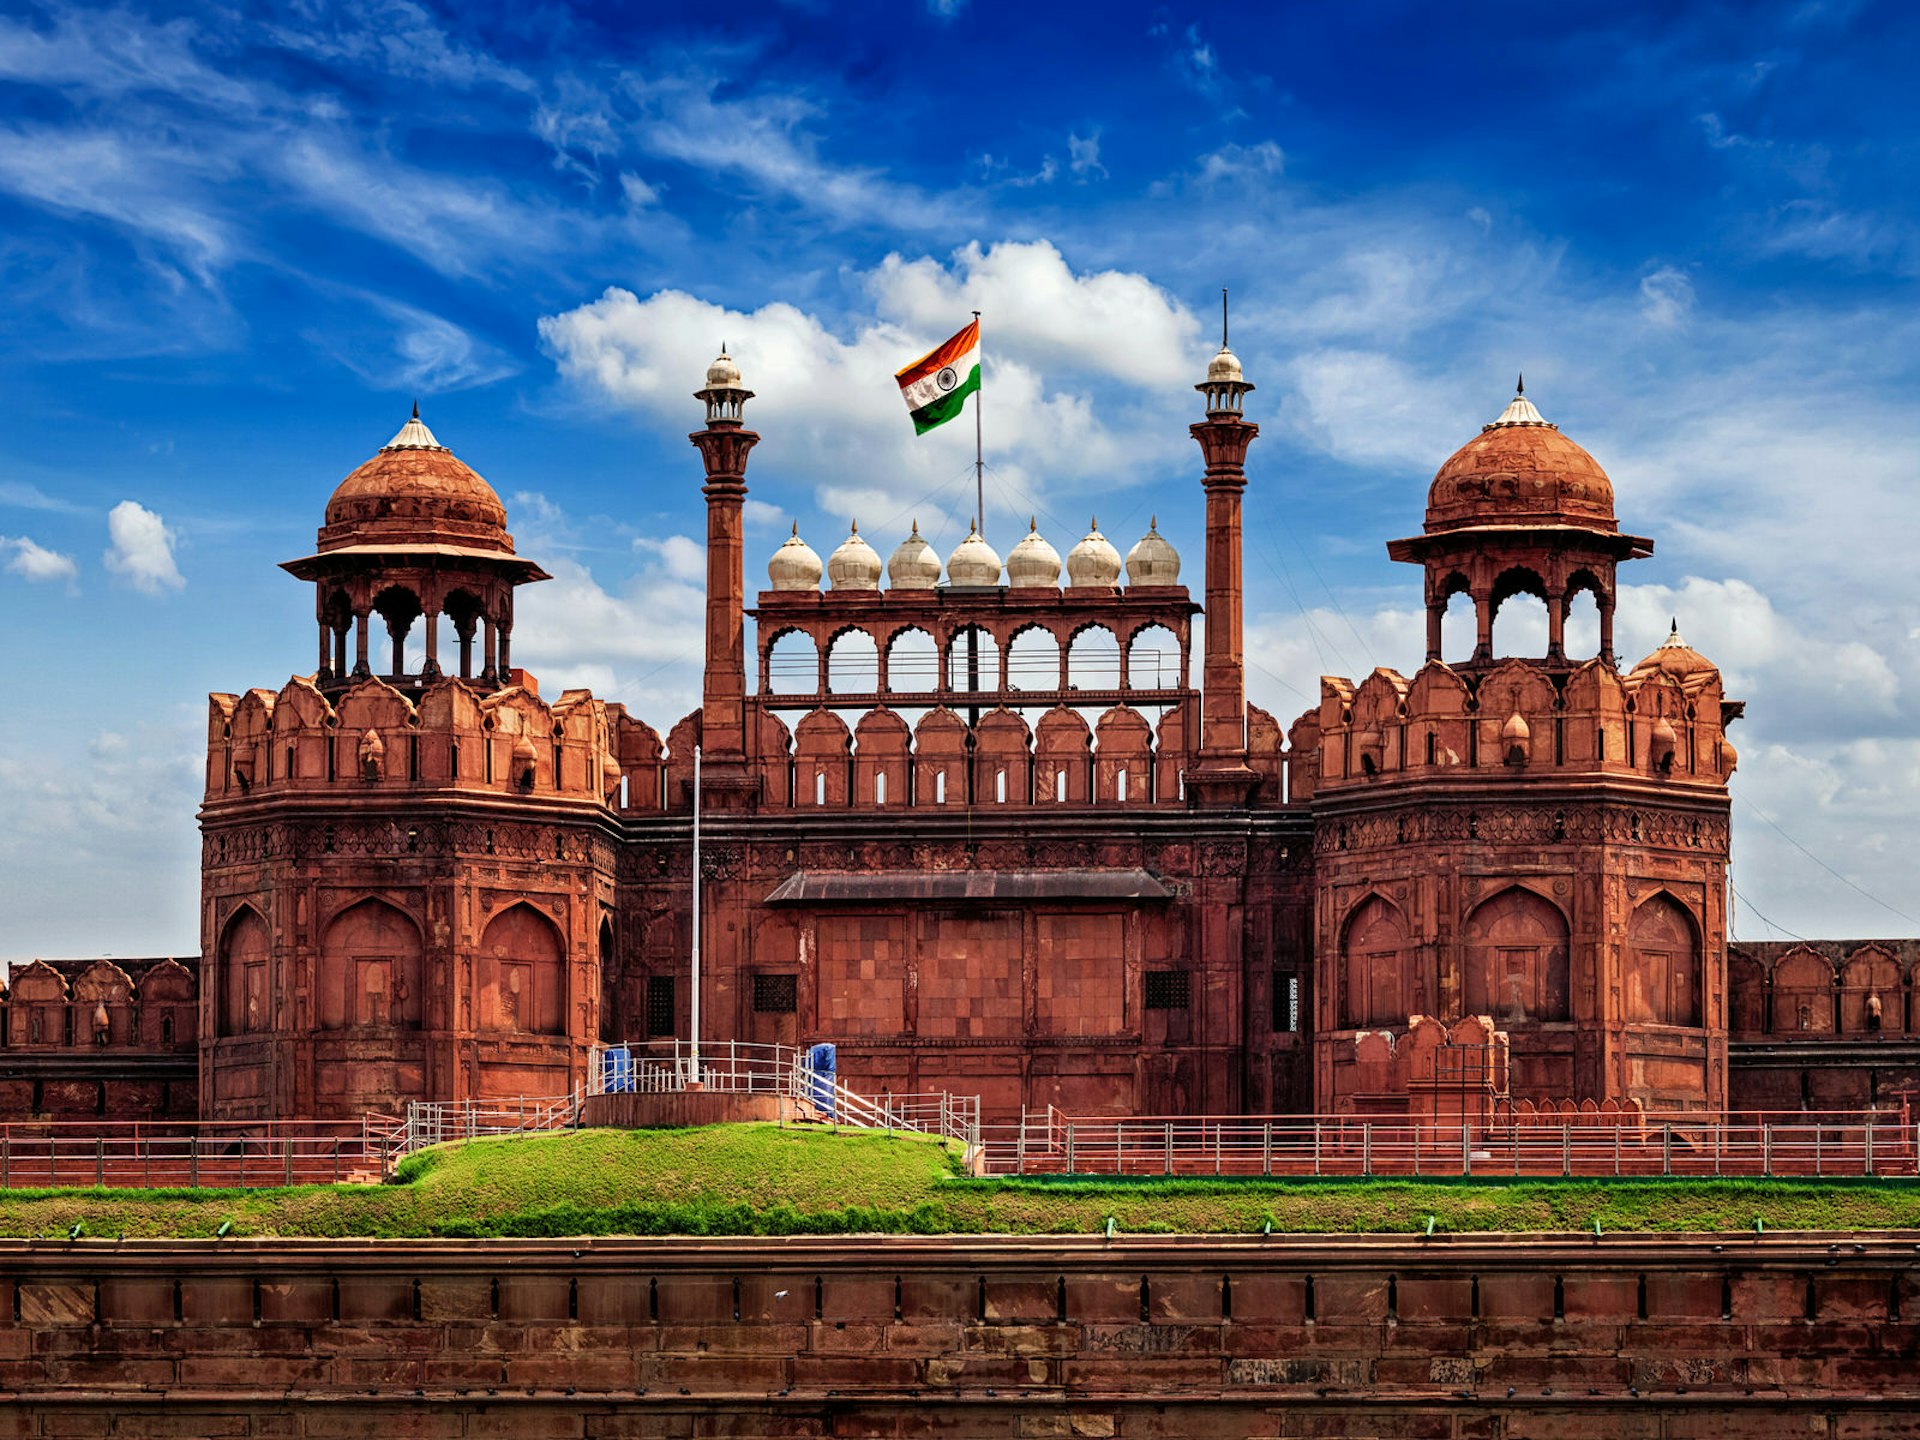 The Indian flag flies over the battlements of a large red-coloured fort with several turrets